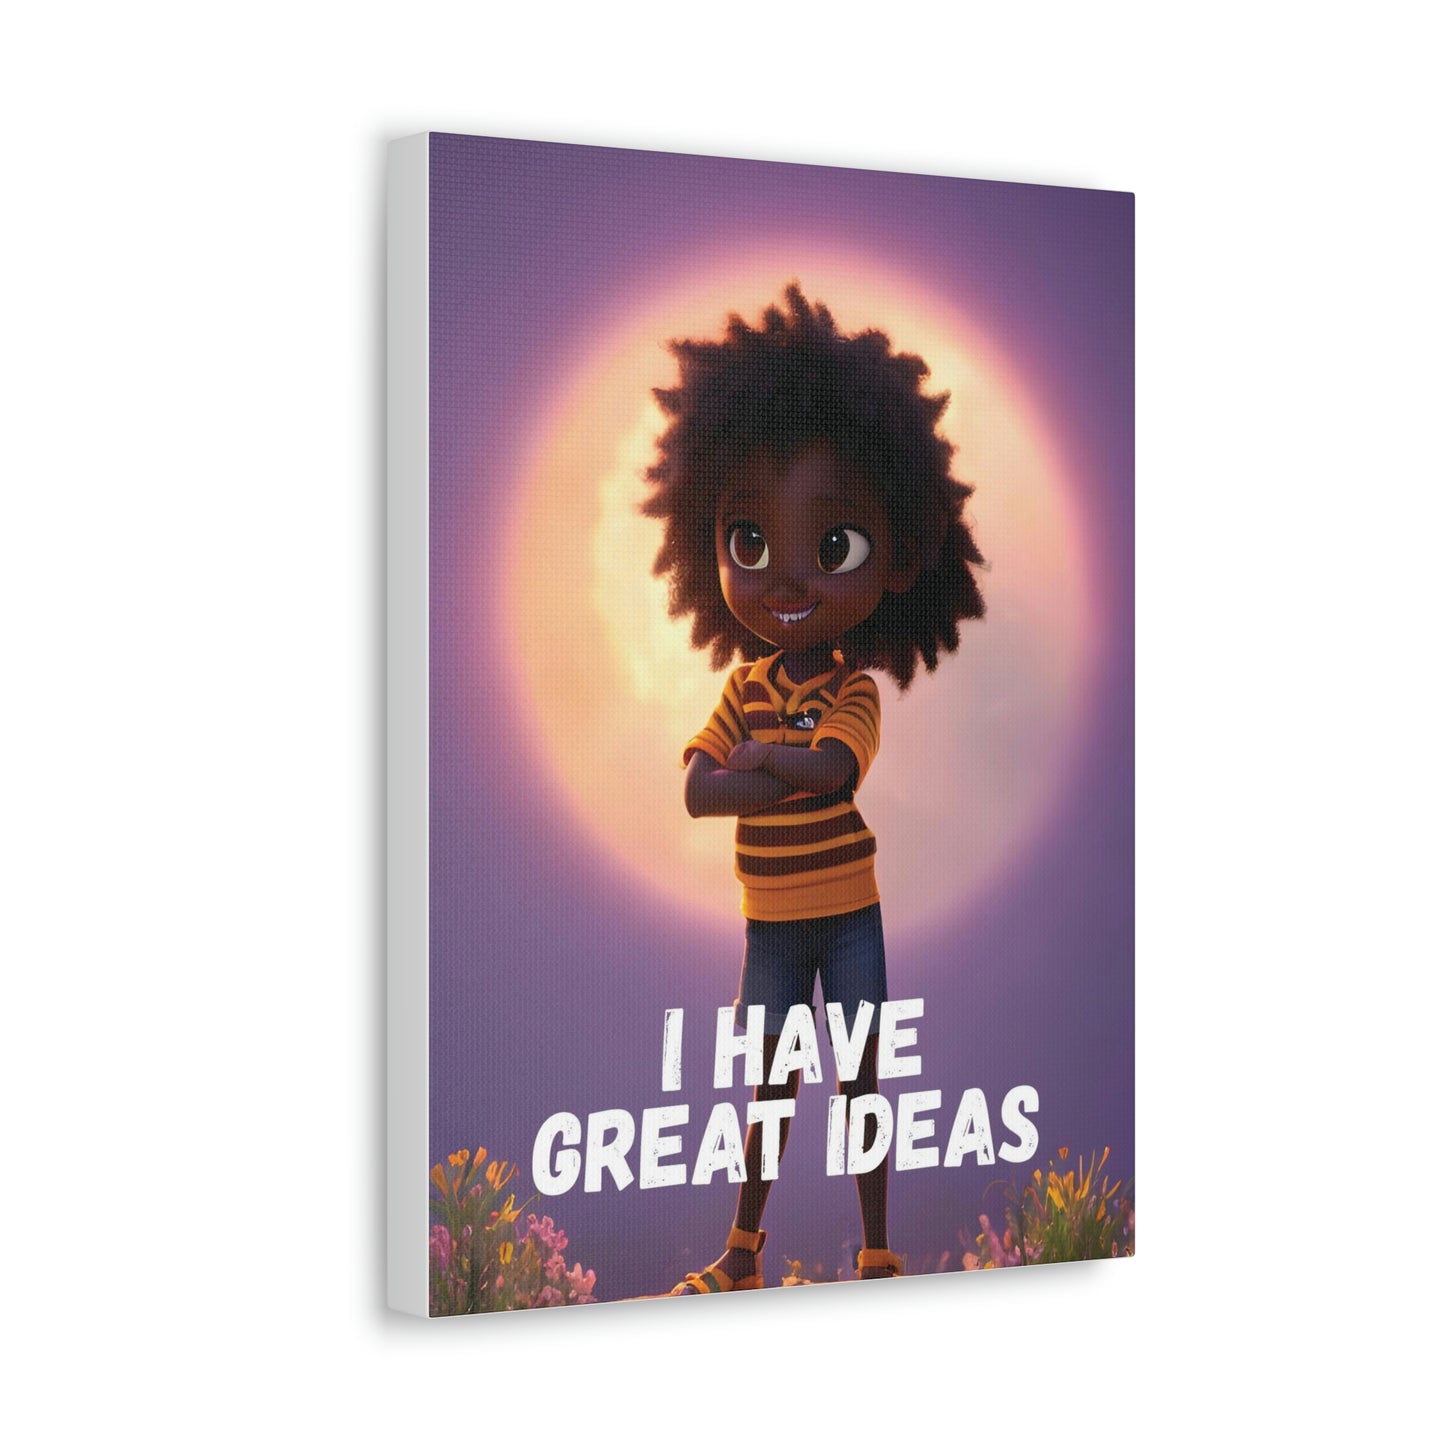 I Have Great Ideas: Celebrating the Creativity and Resilience of Young Black Girls